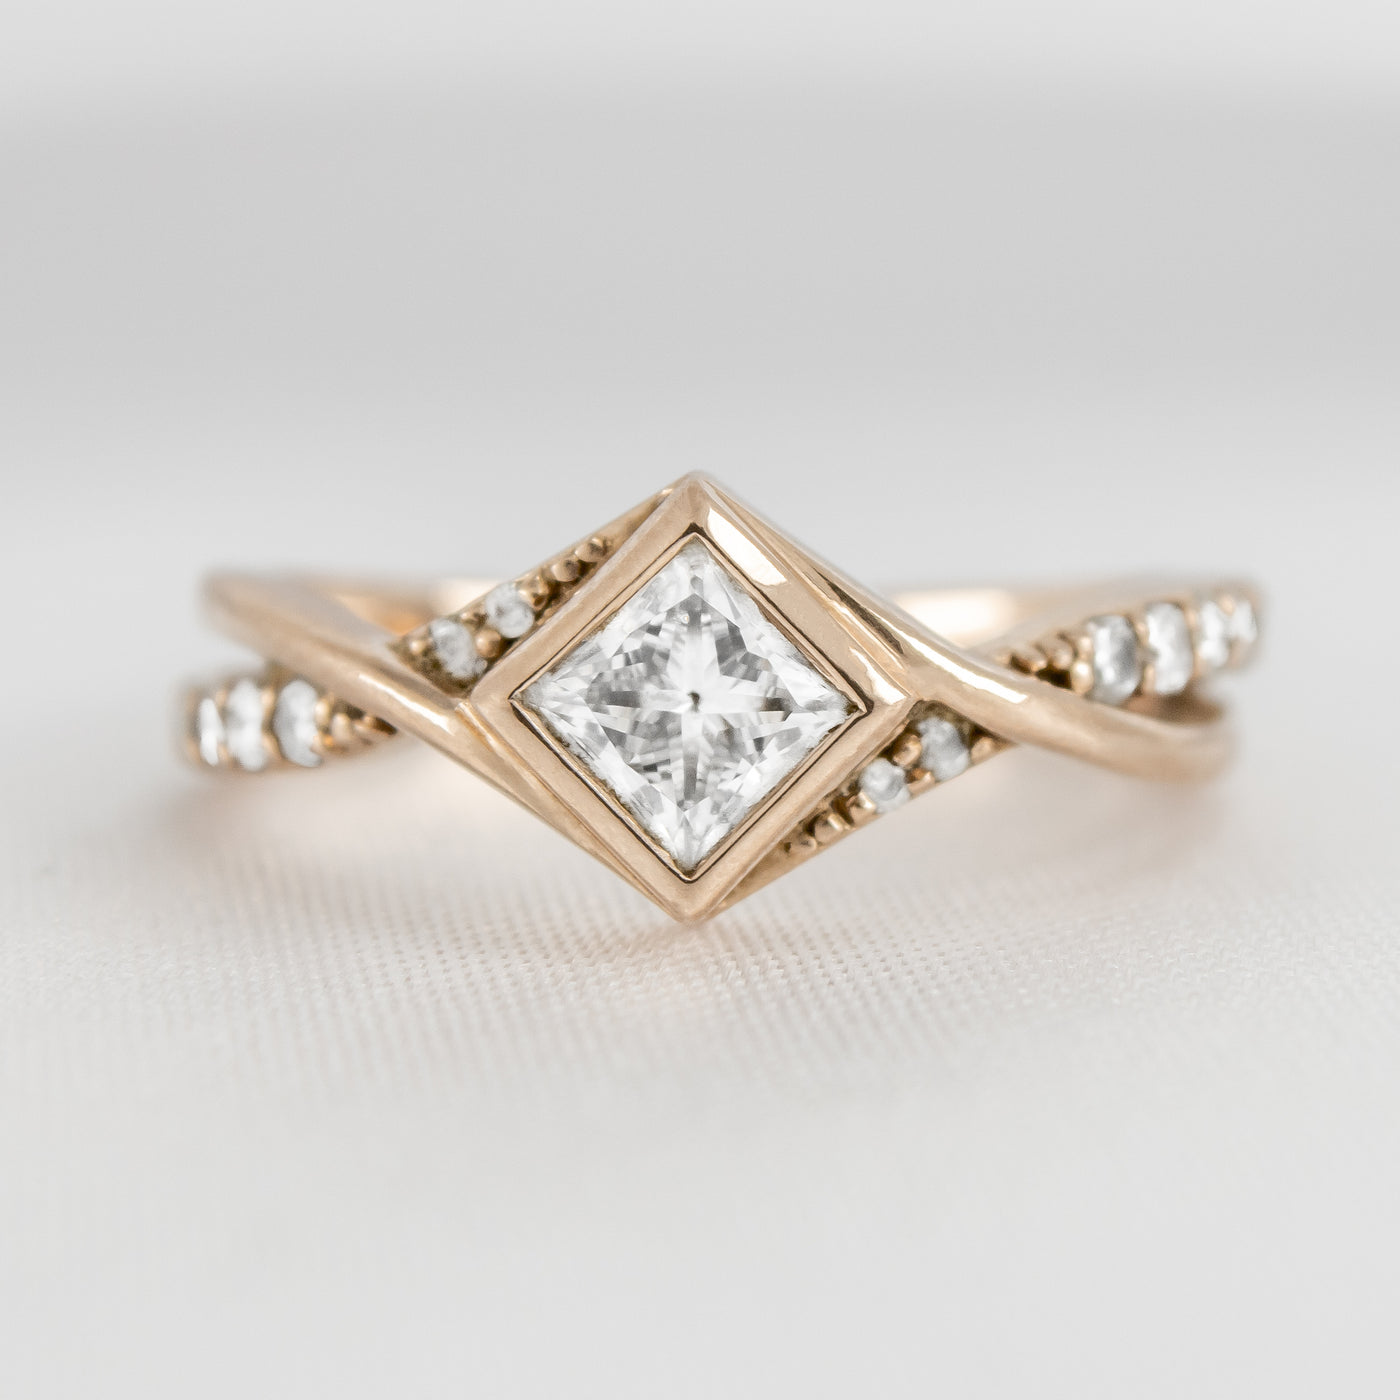 Show in 0.91 Carat * The Oakley Twist Princess Cut Diamond Engagement Ring | Lisa Robin#color_14k-rose-gold